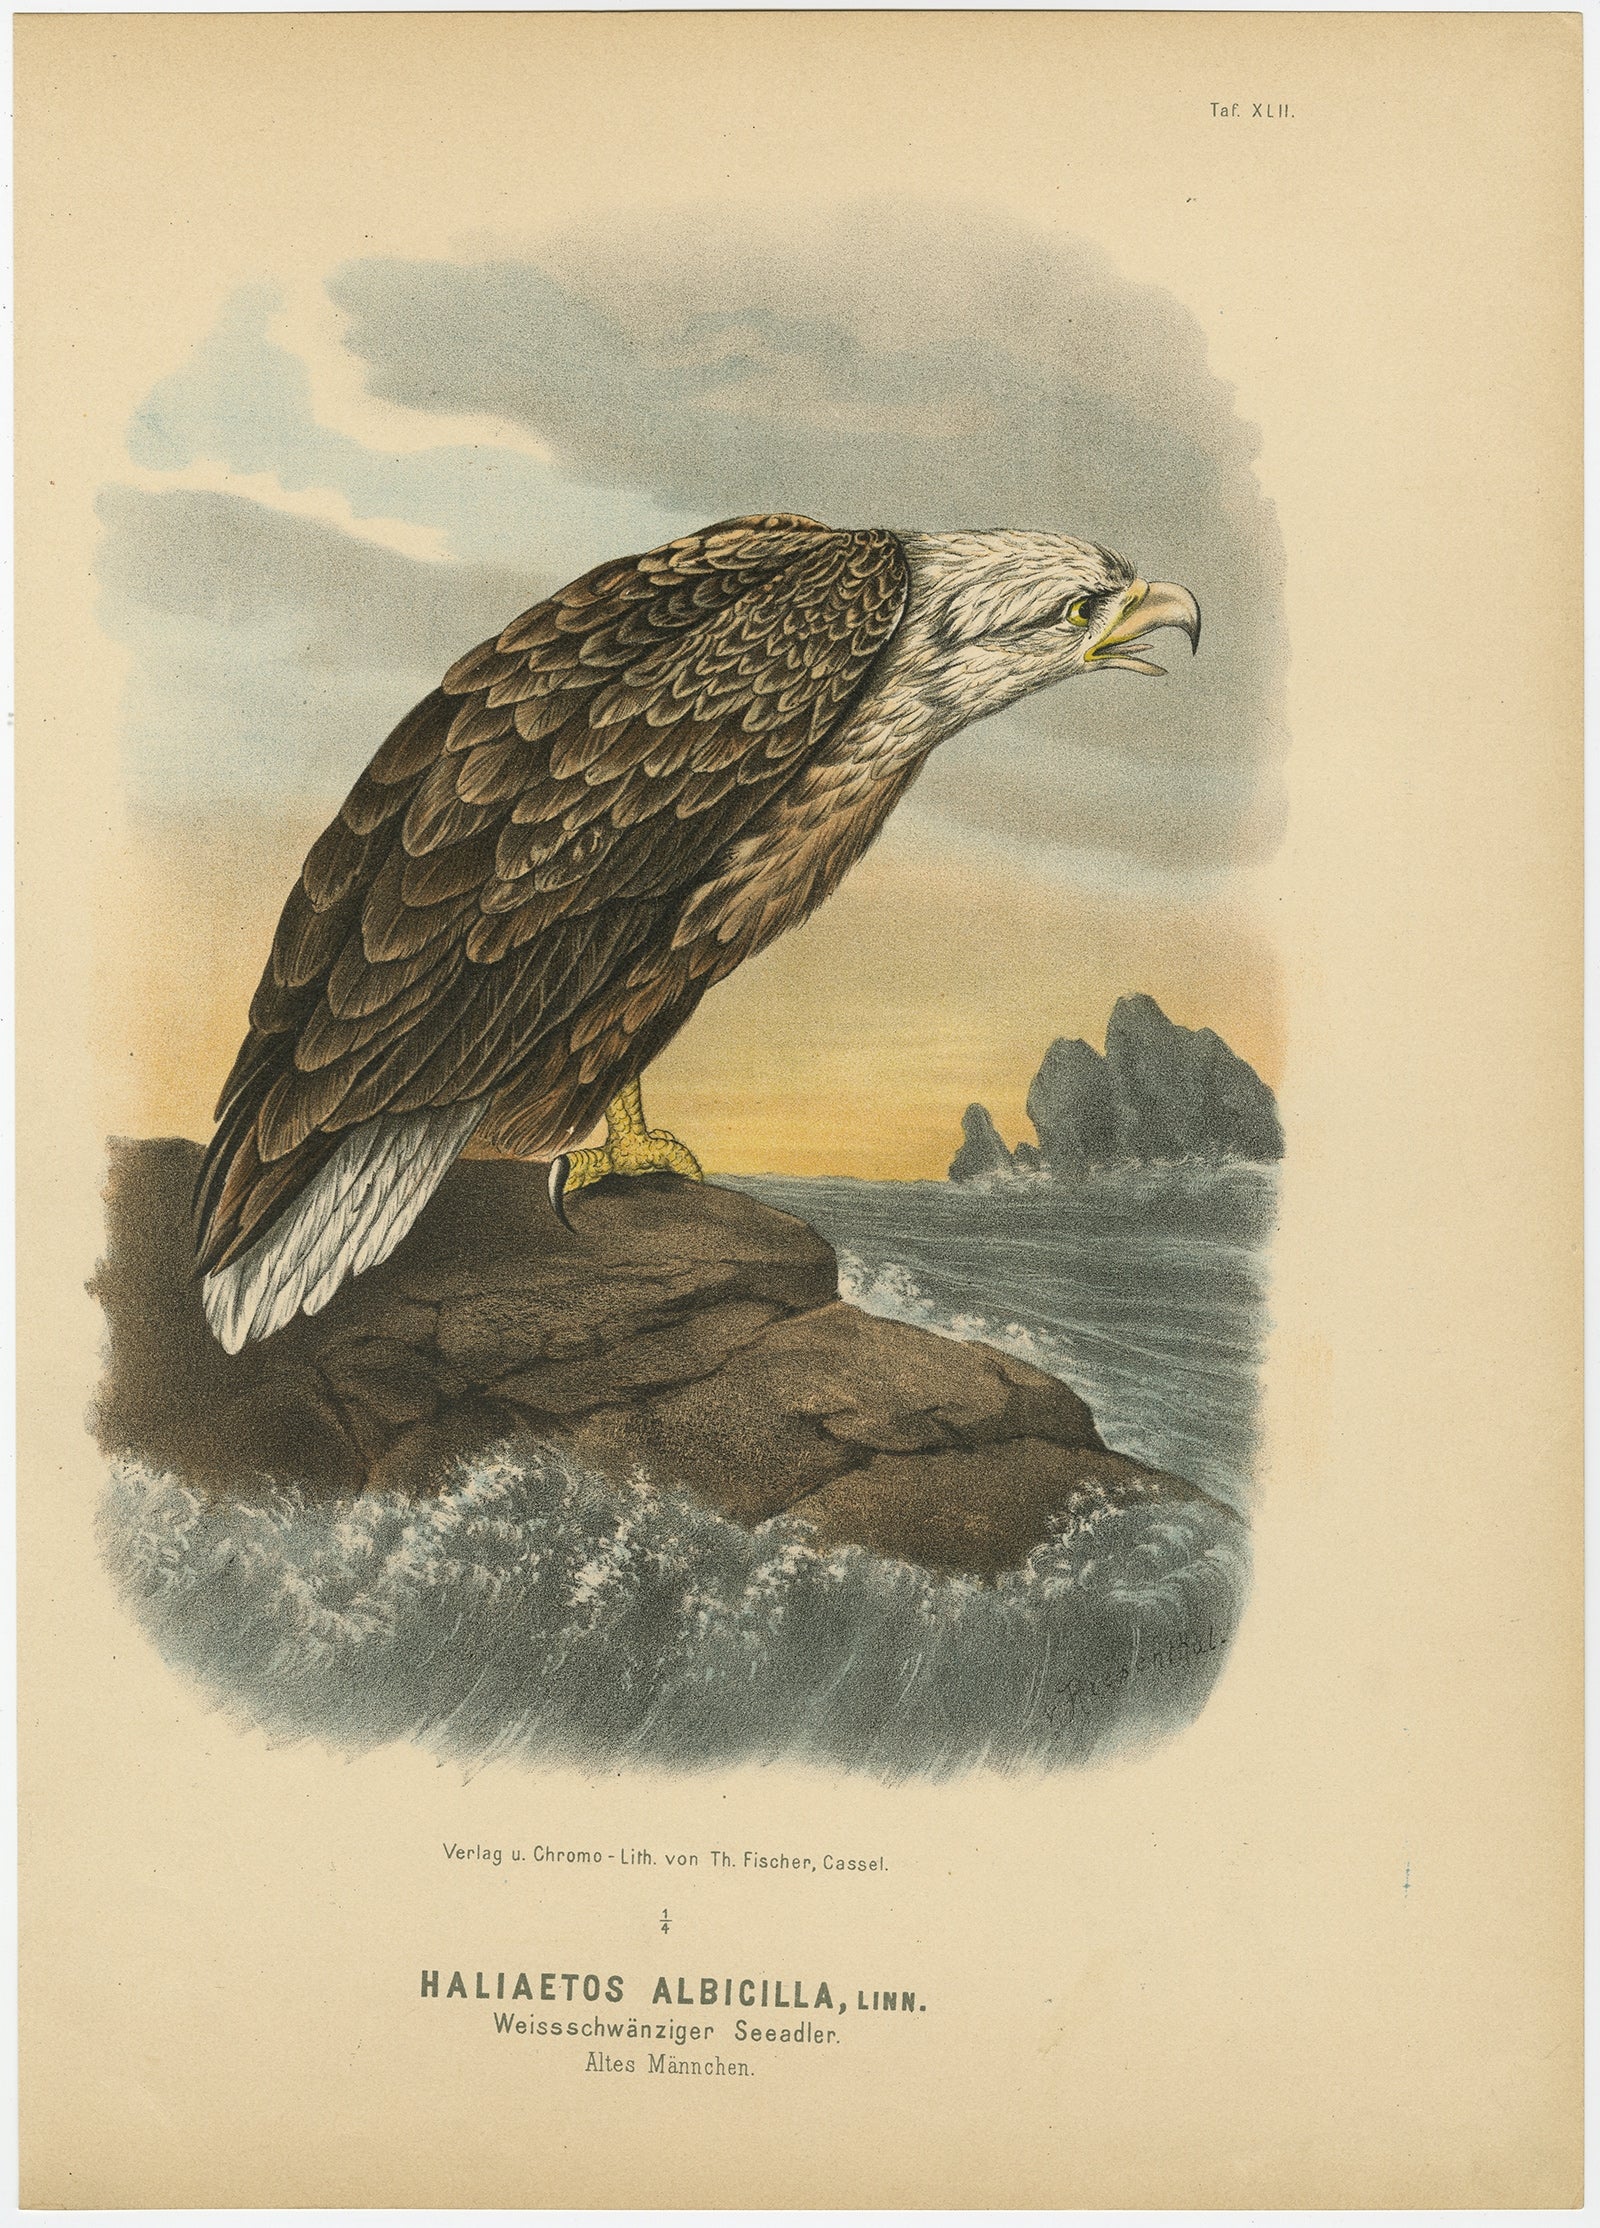 Antique print, titled: 'Taf. XLII. Haliaetos Albicilla. Weissschwanziger Seeadler, altes Mannchen.' 

This plate shows the white-tailed eagle (Haliaeetus albicilla), also known as the ern, erne, gray eagle, Eurasian sea eagle and white-tailed